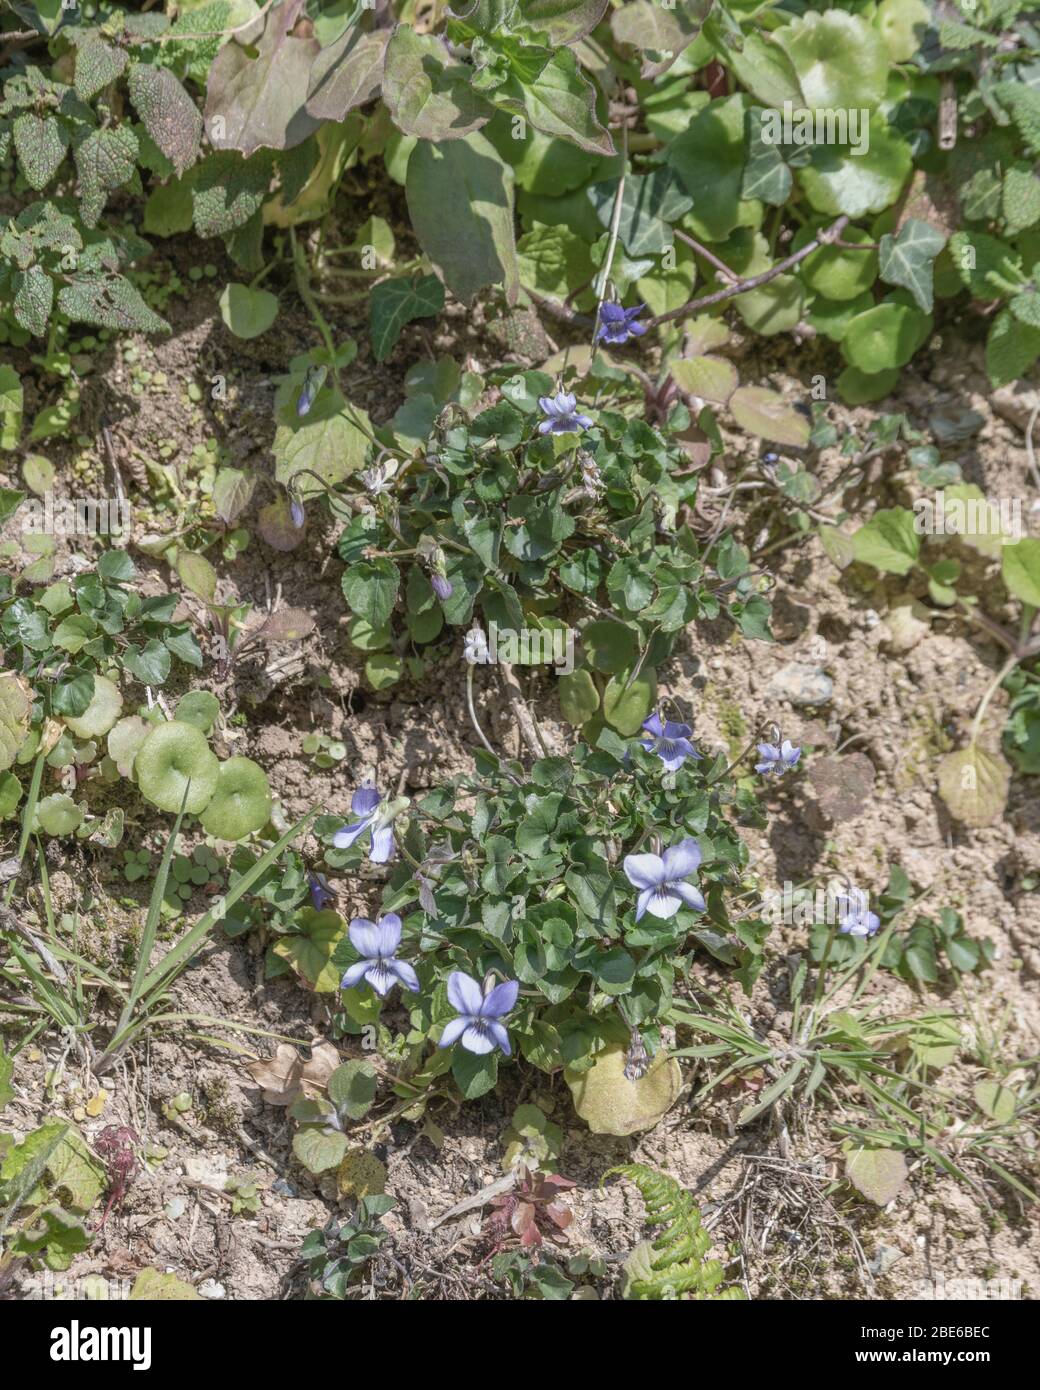 Flowers and leaves of Dog Violet / Viola riviniana in Spring sunshine. Violet a traditional medicinal plant used in herbal remedies & home cures. Stock Photo